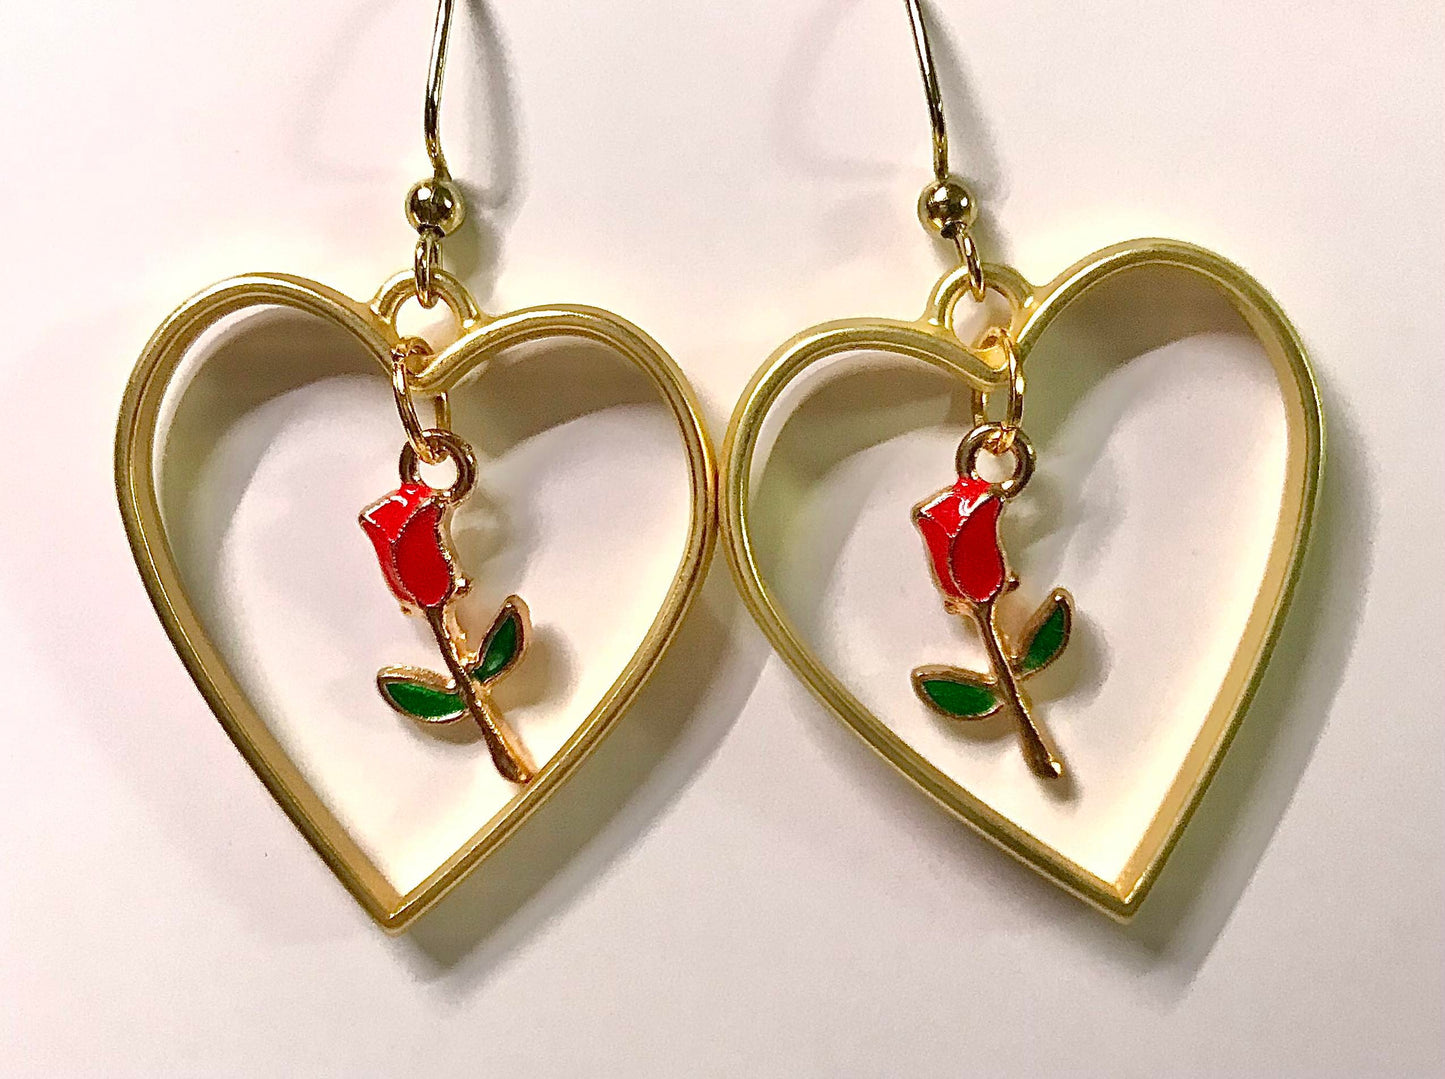 Heart Rose Hand-Crafted Earrings